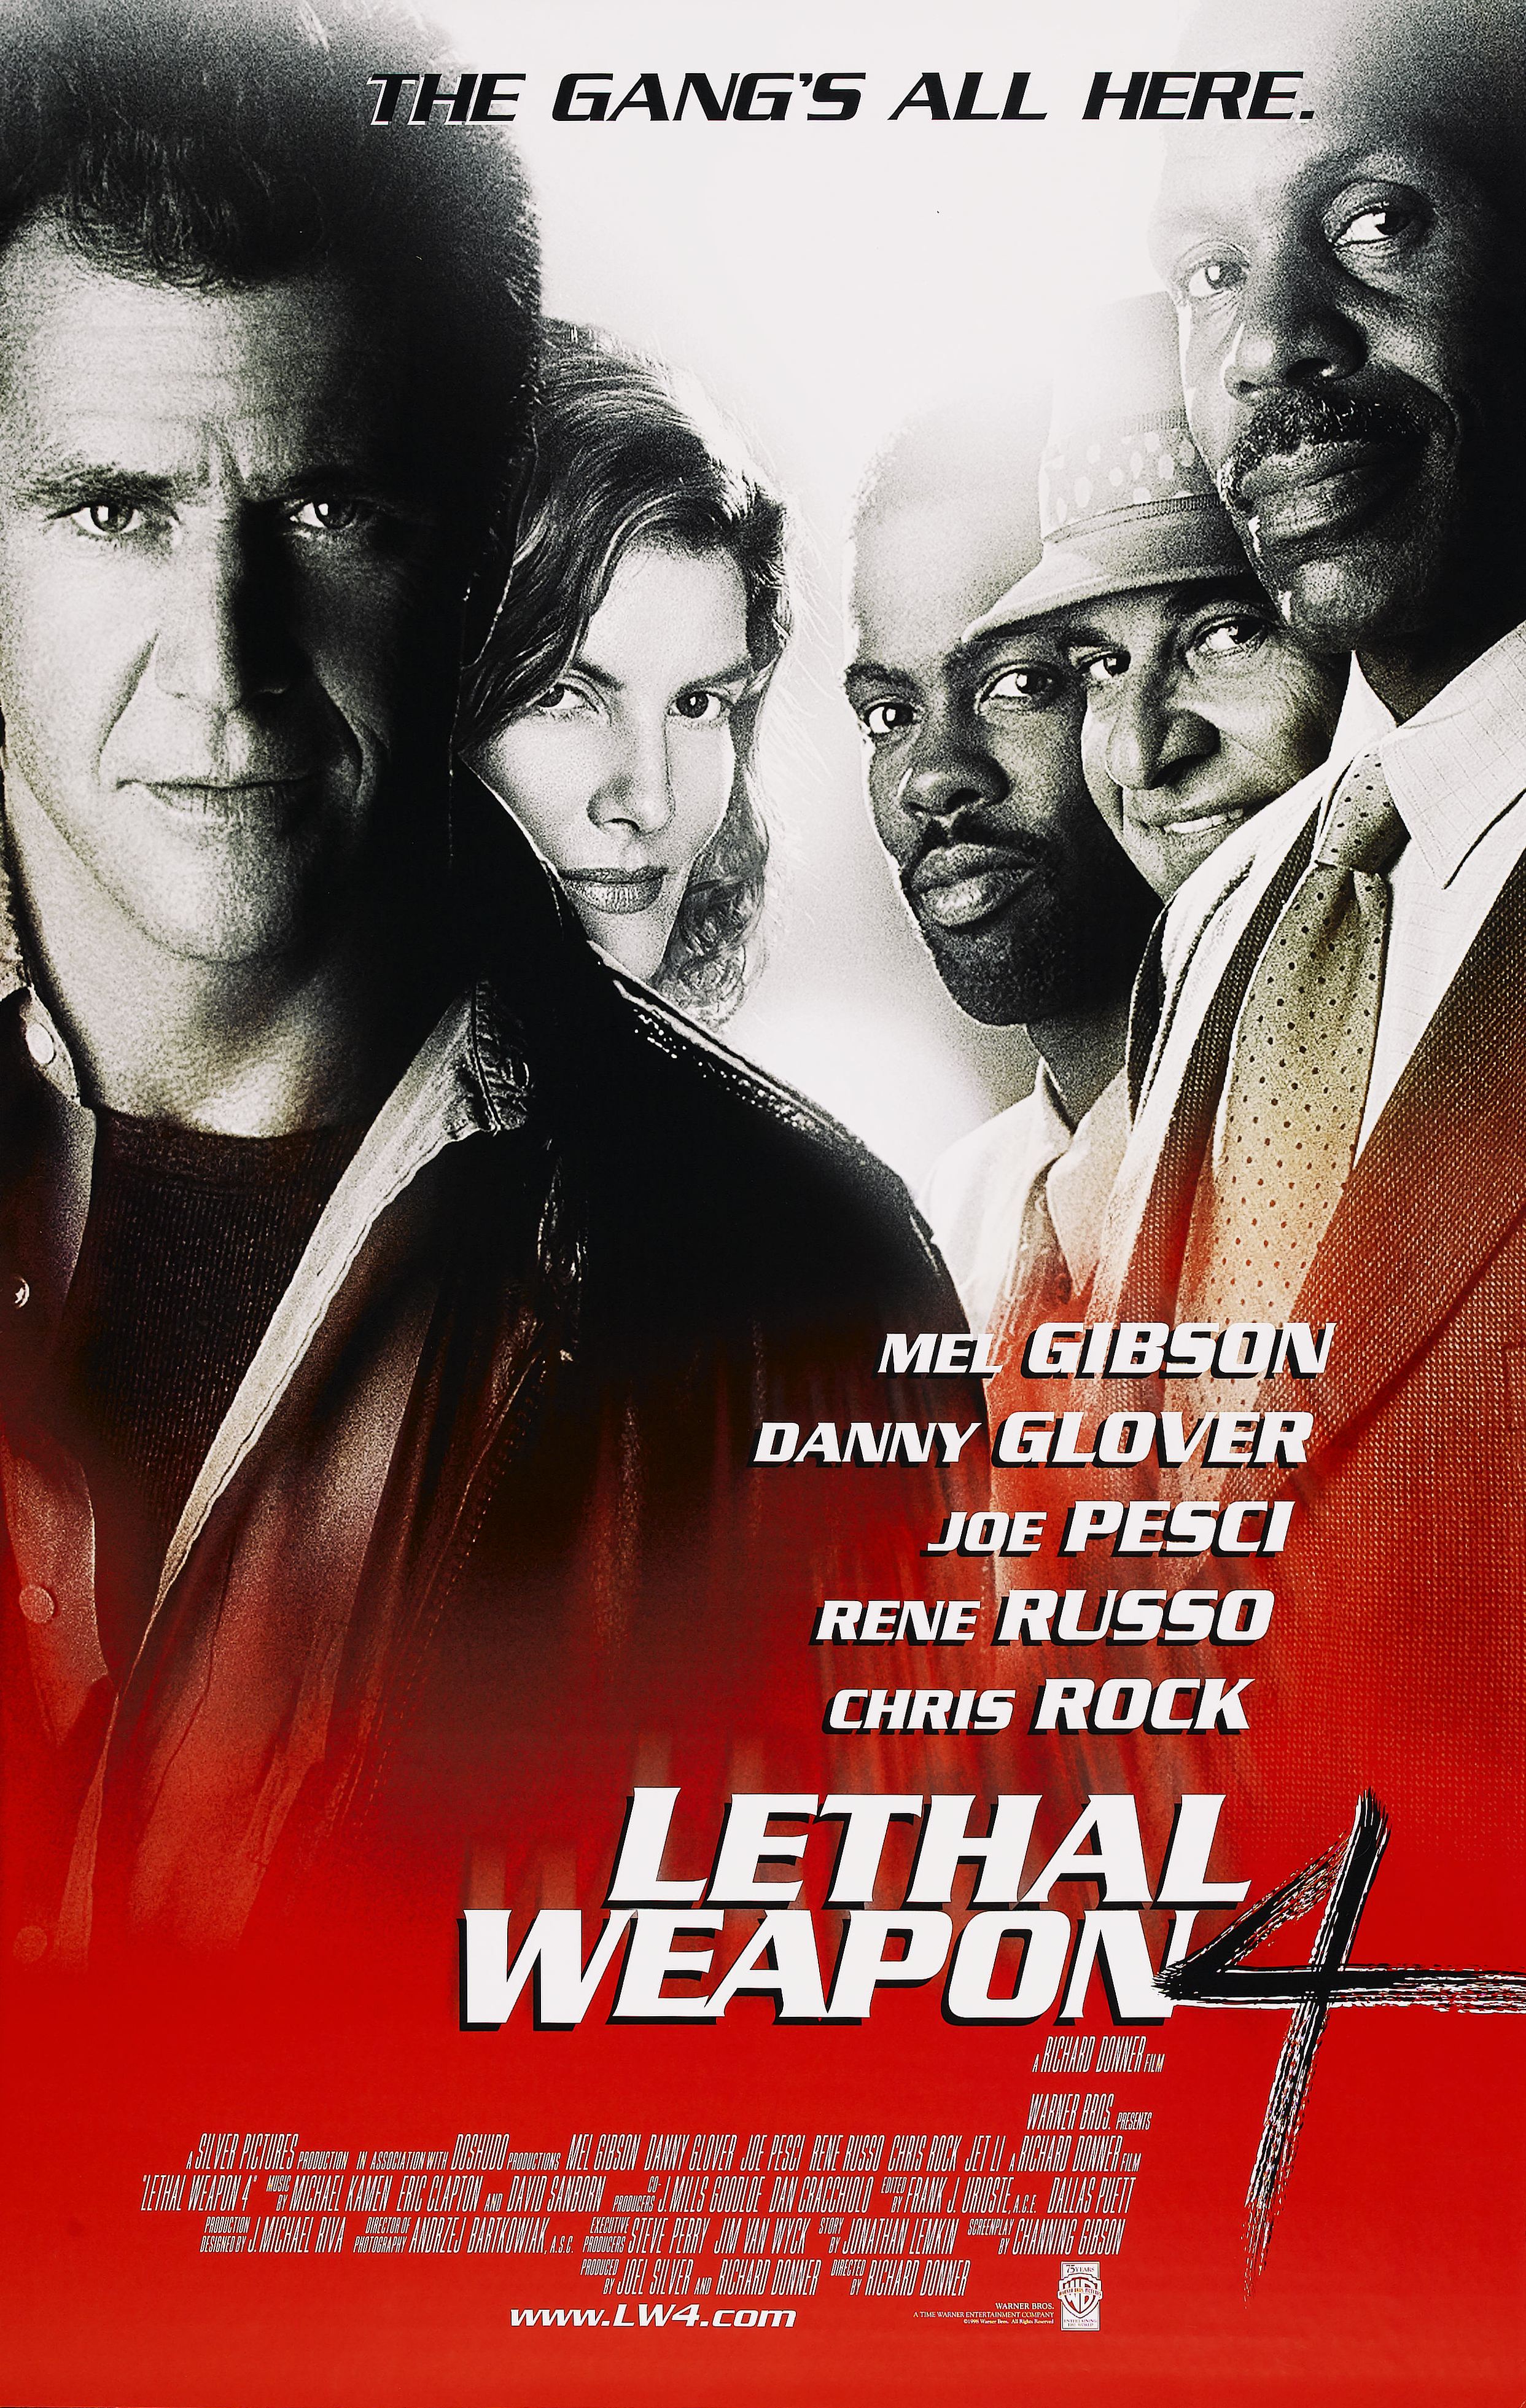 Lethal Weapon 4: NEW CHARACTERS! A woman, a wise-cracking short guy, and Chris Rock, whose comedy never gets into the scripts. So why is he in the movie? Or any movie?